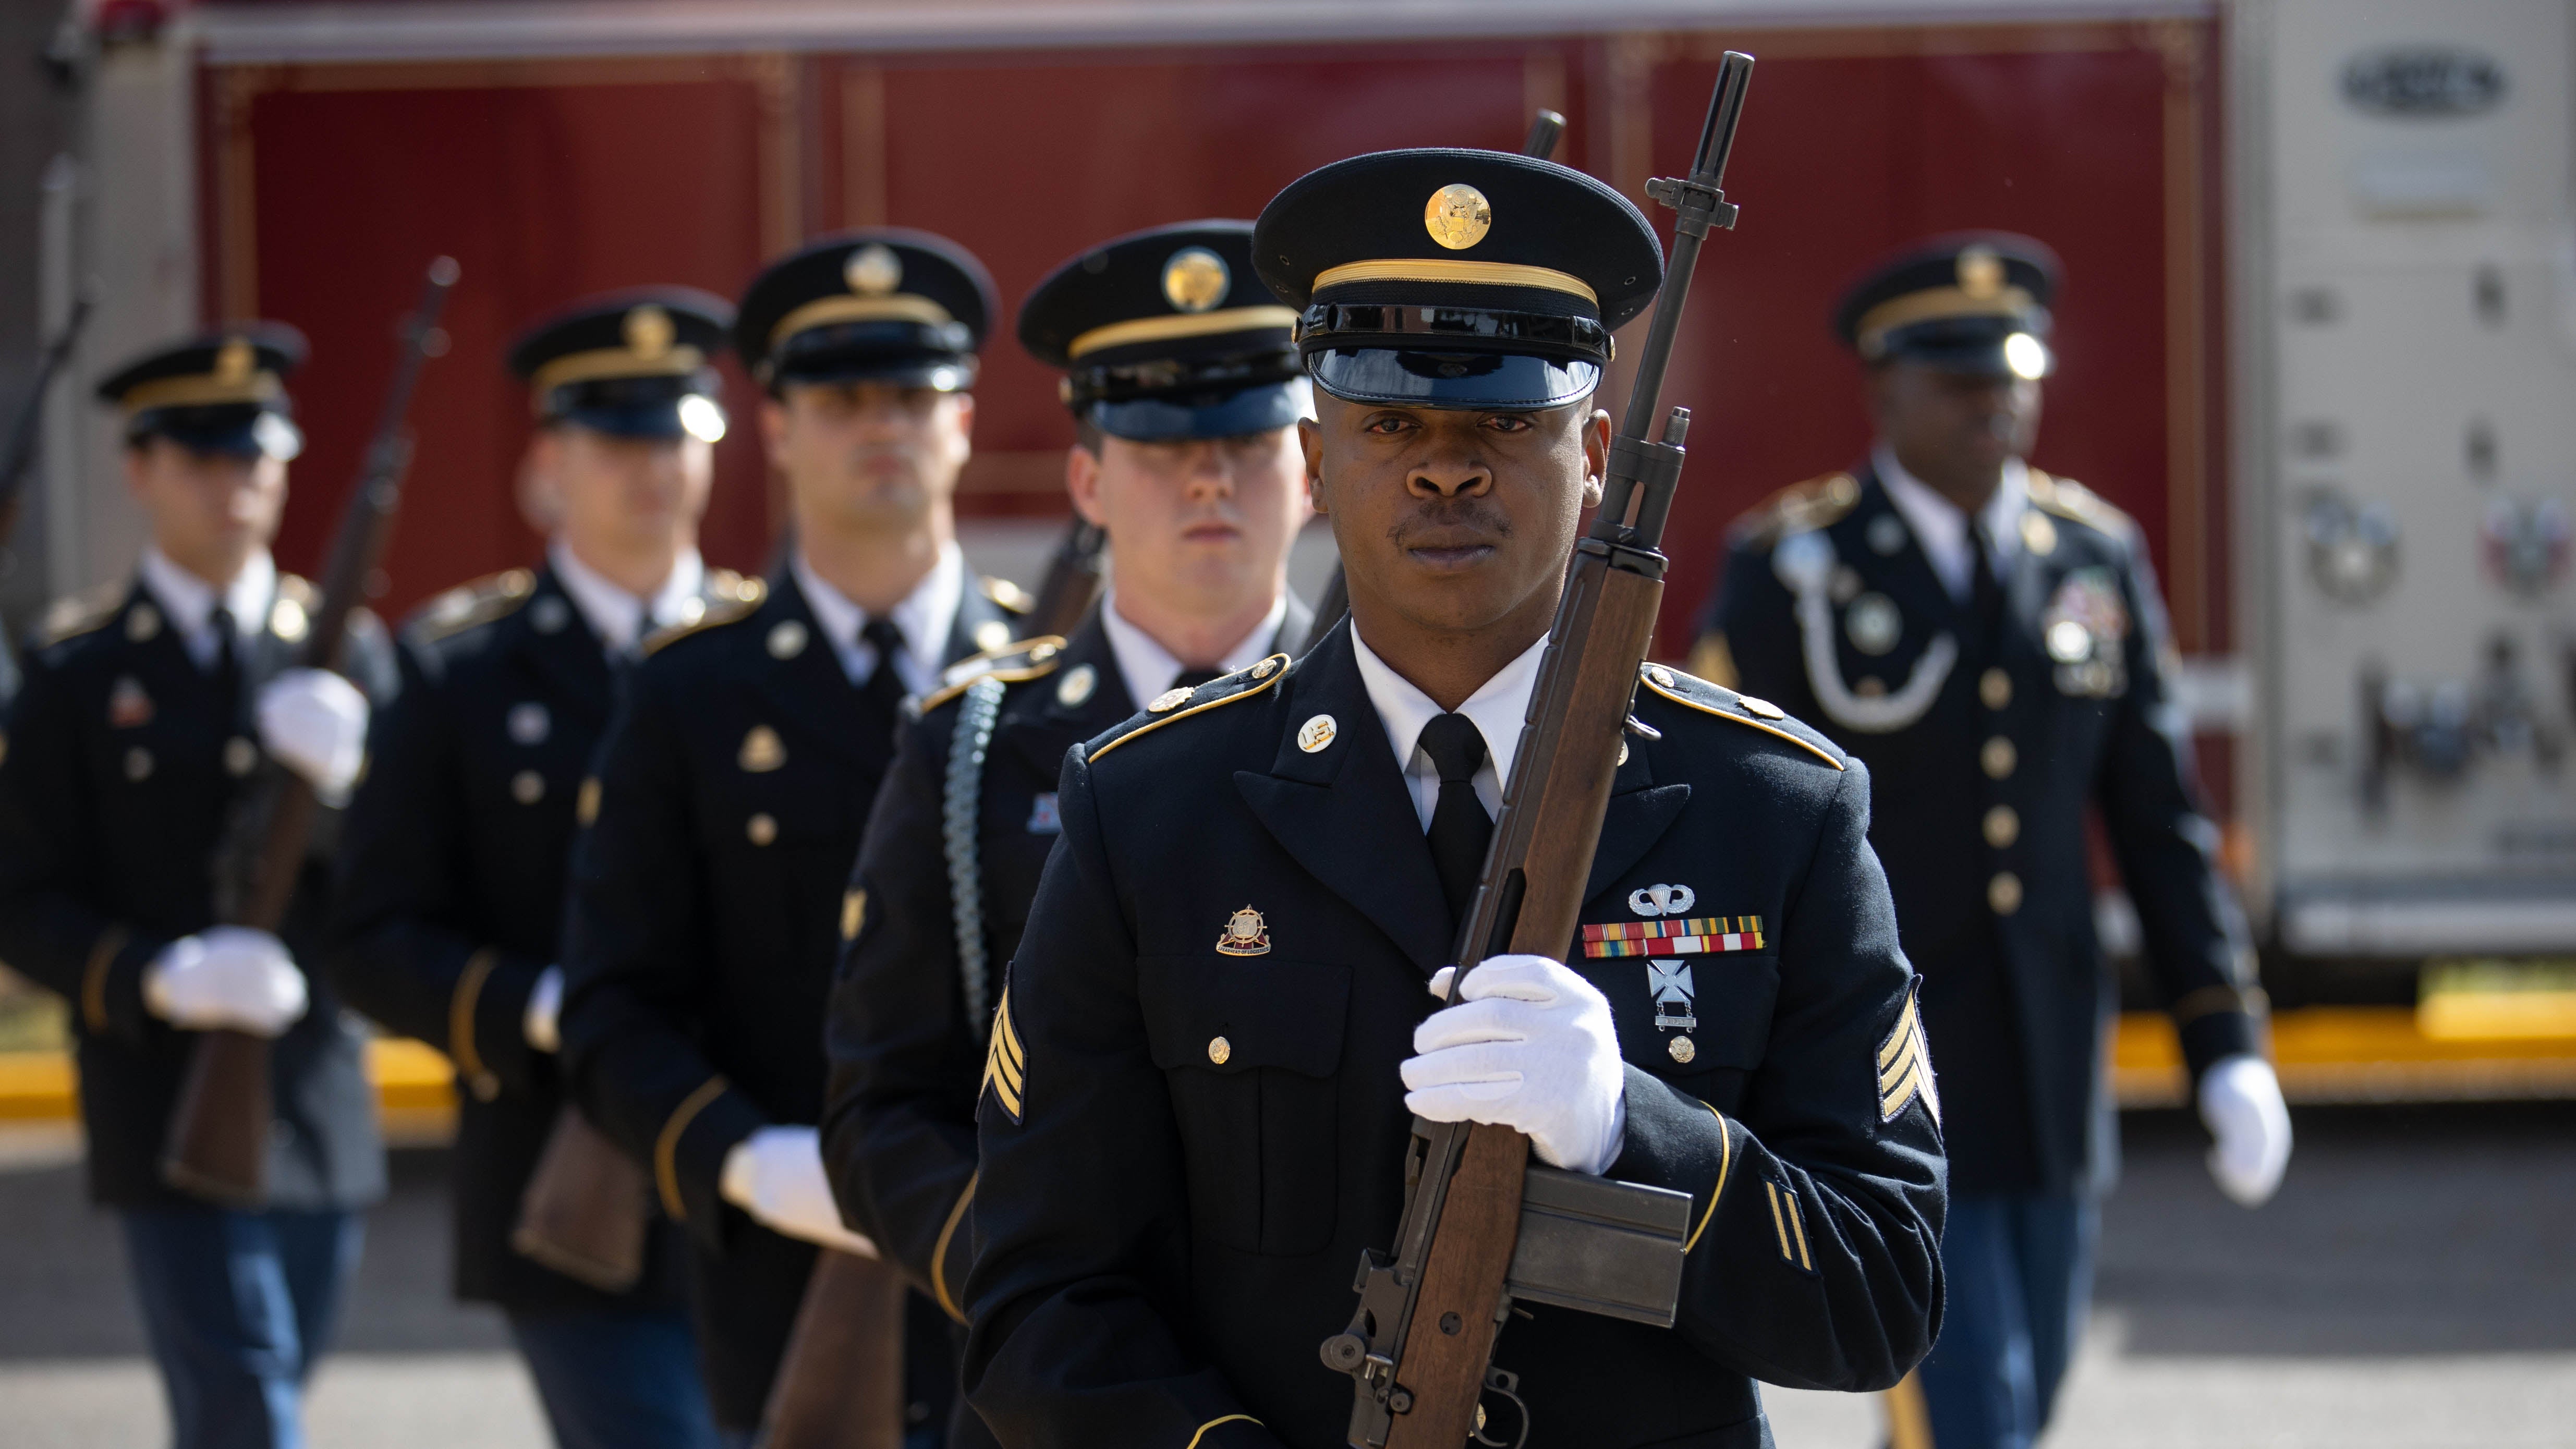 Soldiers in the honor guard.